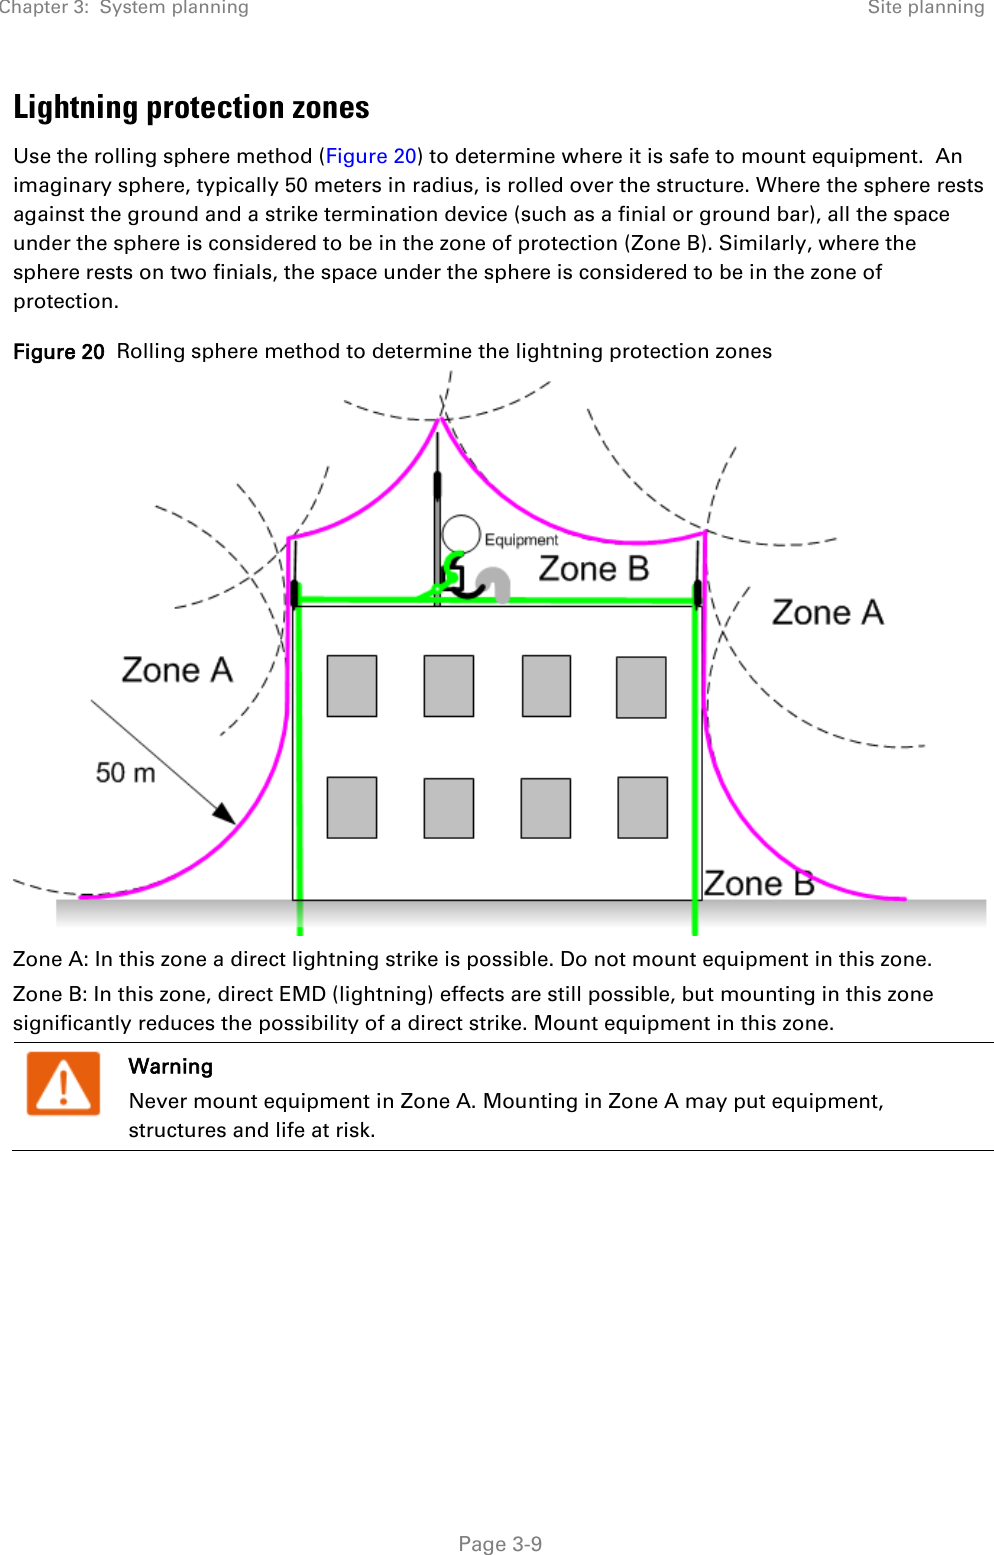 Chapter 3:  System planning Site planning   Page 3-9 Lightning protection zones Use the rolling sphere method (Figure 20) to determine where it is safe to mount equipment.  An imaginary sphere, typically 50 meters in radius, is rolled over the structure. Where the sphere rests against the ground and a strike termination device (such as a finial or ground bar), all the space under the sphere is considered to be in the zone of protection (Zone B). Similarly, where the sphere rests on two finials, the space under the sphere is considered to be in the zone of protection. Figure 20  Rolling sphere method to determine the lightning protection zones  Zone A: In this zone a direct lightning strike is possible. Do not mount equipment in this zone. Zone B: In this zone, direct EMD (lightning) effects are still possible, but mounting in this zone significantly reduces the possibility of a direct strike. Mount equipment in this zone.  Warning Never mount equipment in Zone A. Mounting in Zone A may put equipment, structures and life at risk.     